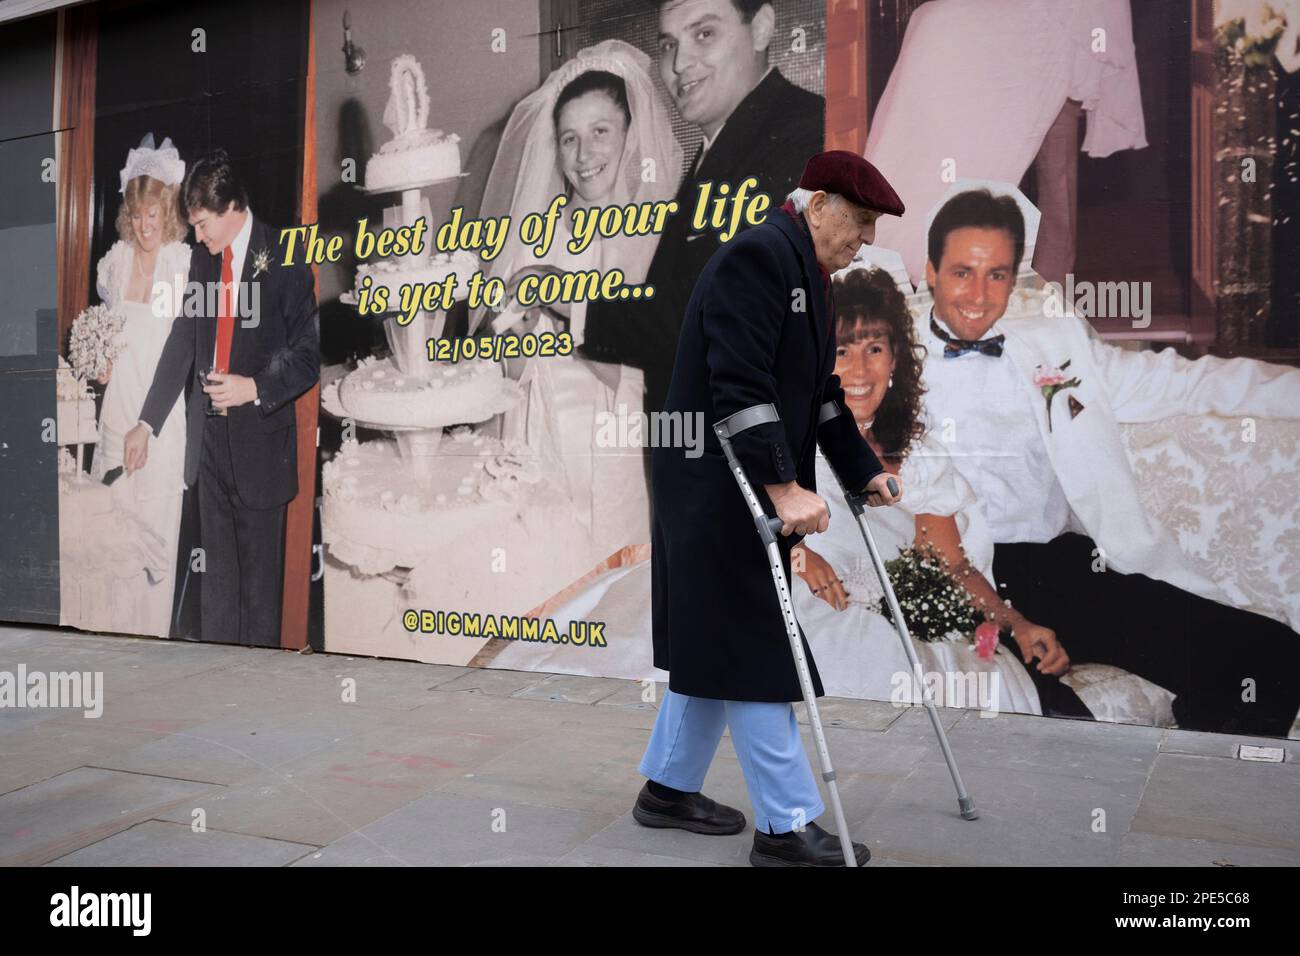 A disabled man walks with the help of crutches past a retail hoarding featuring a young bride and groom couple celebrating their wedding day, a picture of loyalty, dedication from youth to pension age, on 13th March 2023, in London, England. Stock Photo